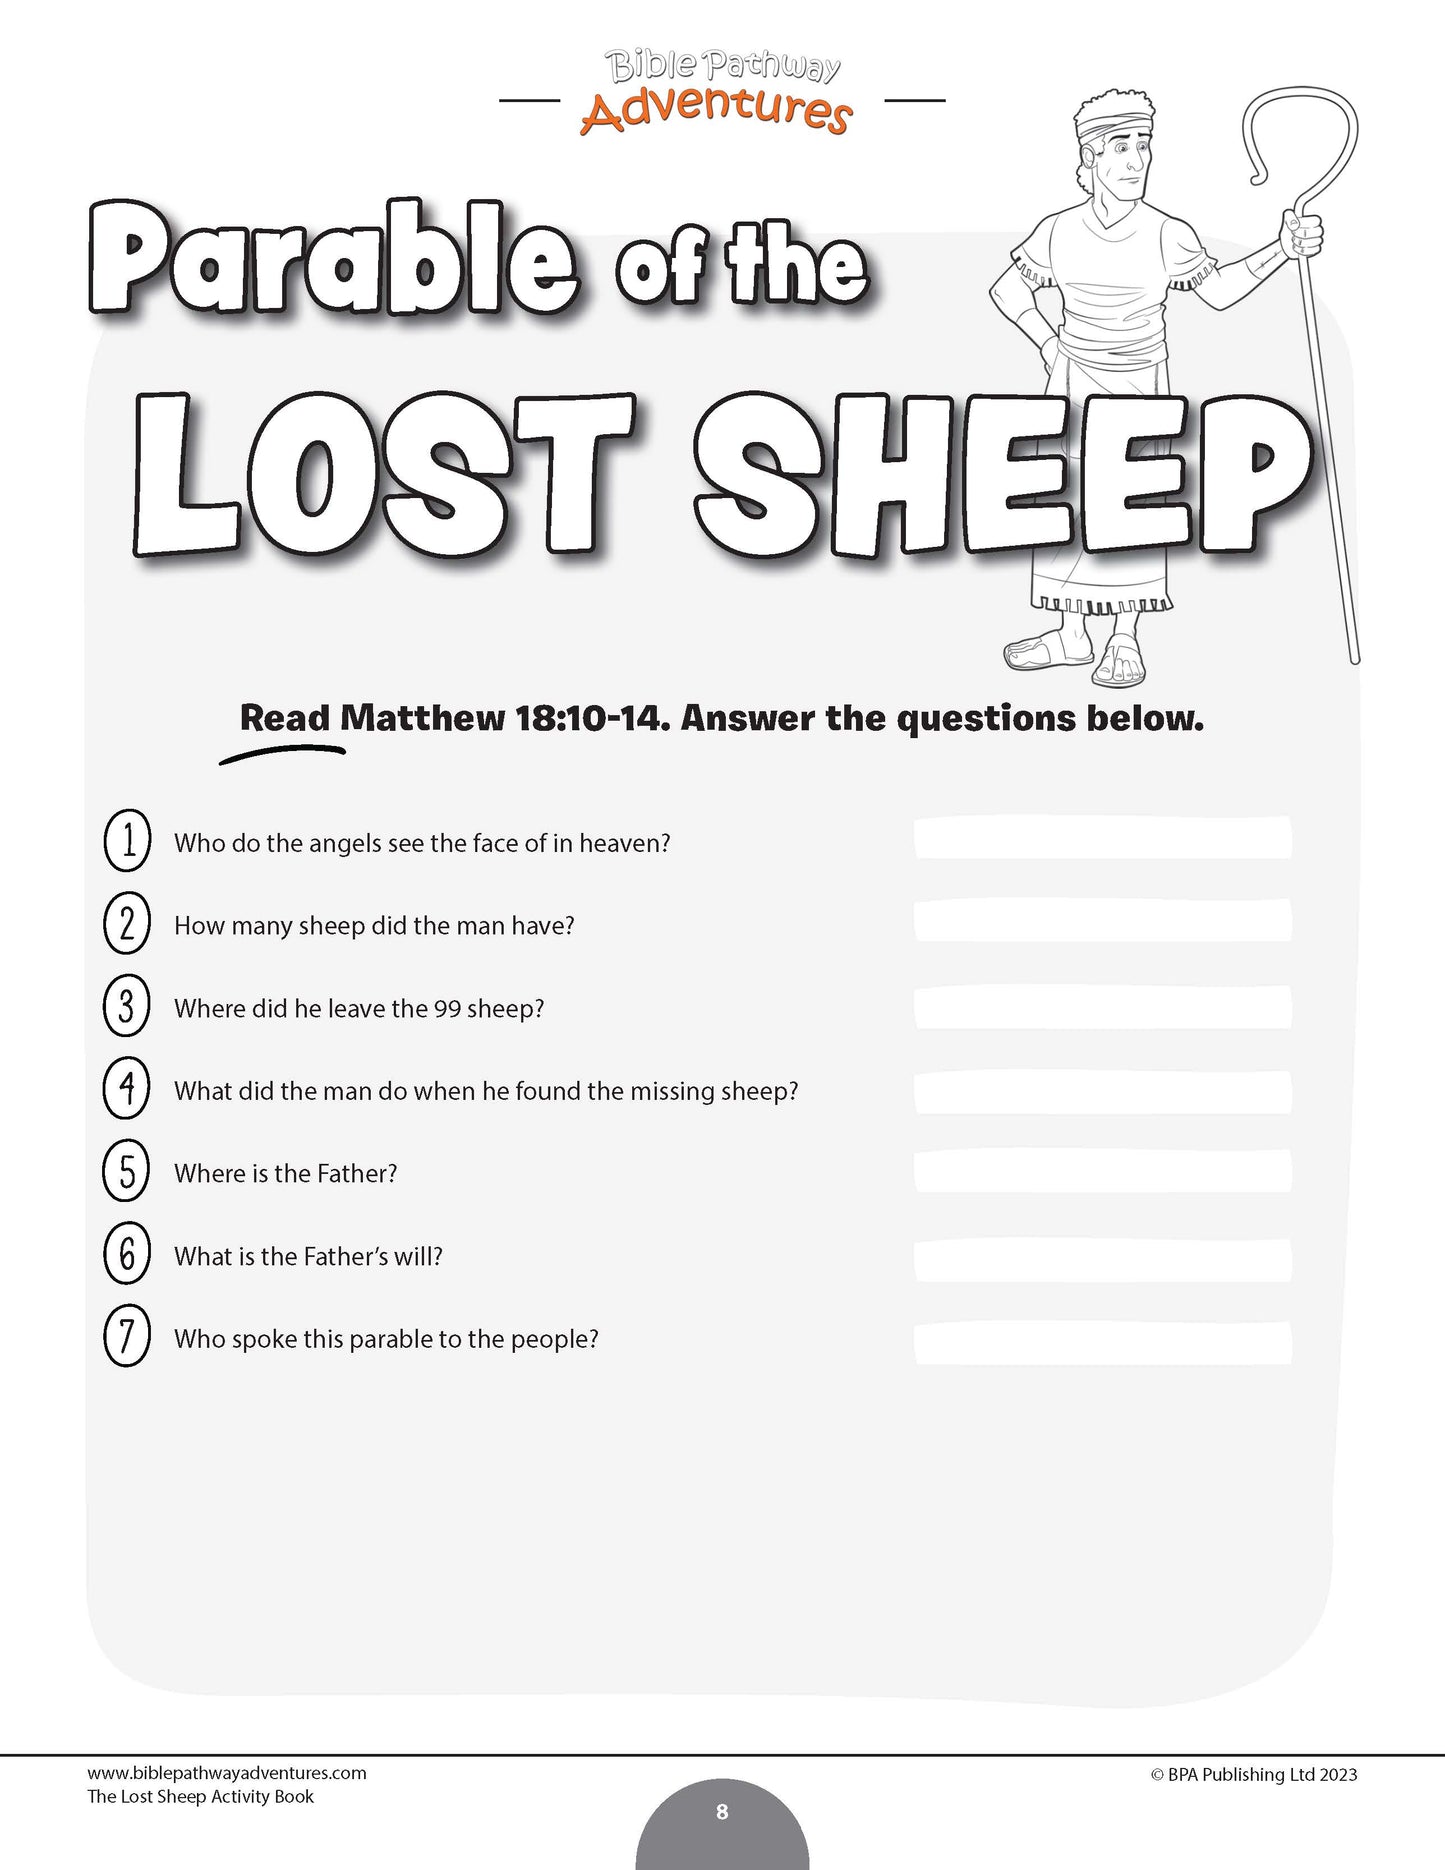 Parable of the Lost Sheep Activity Book